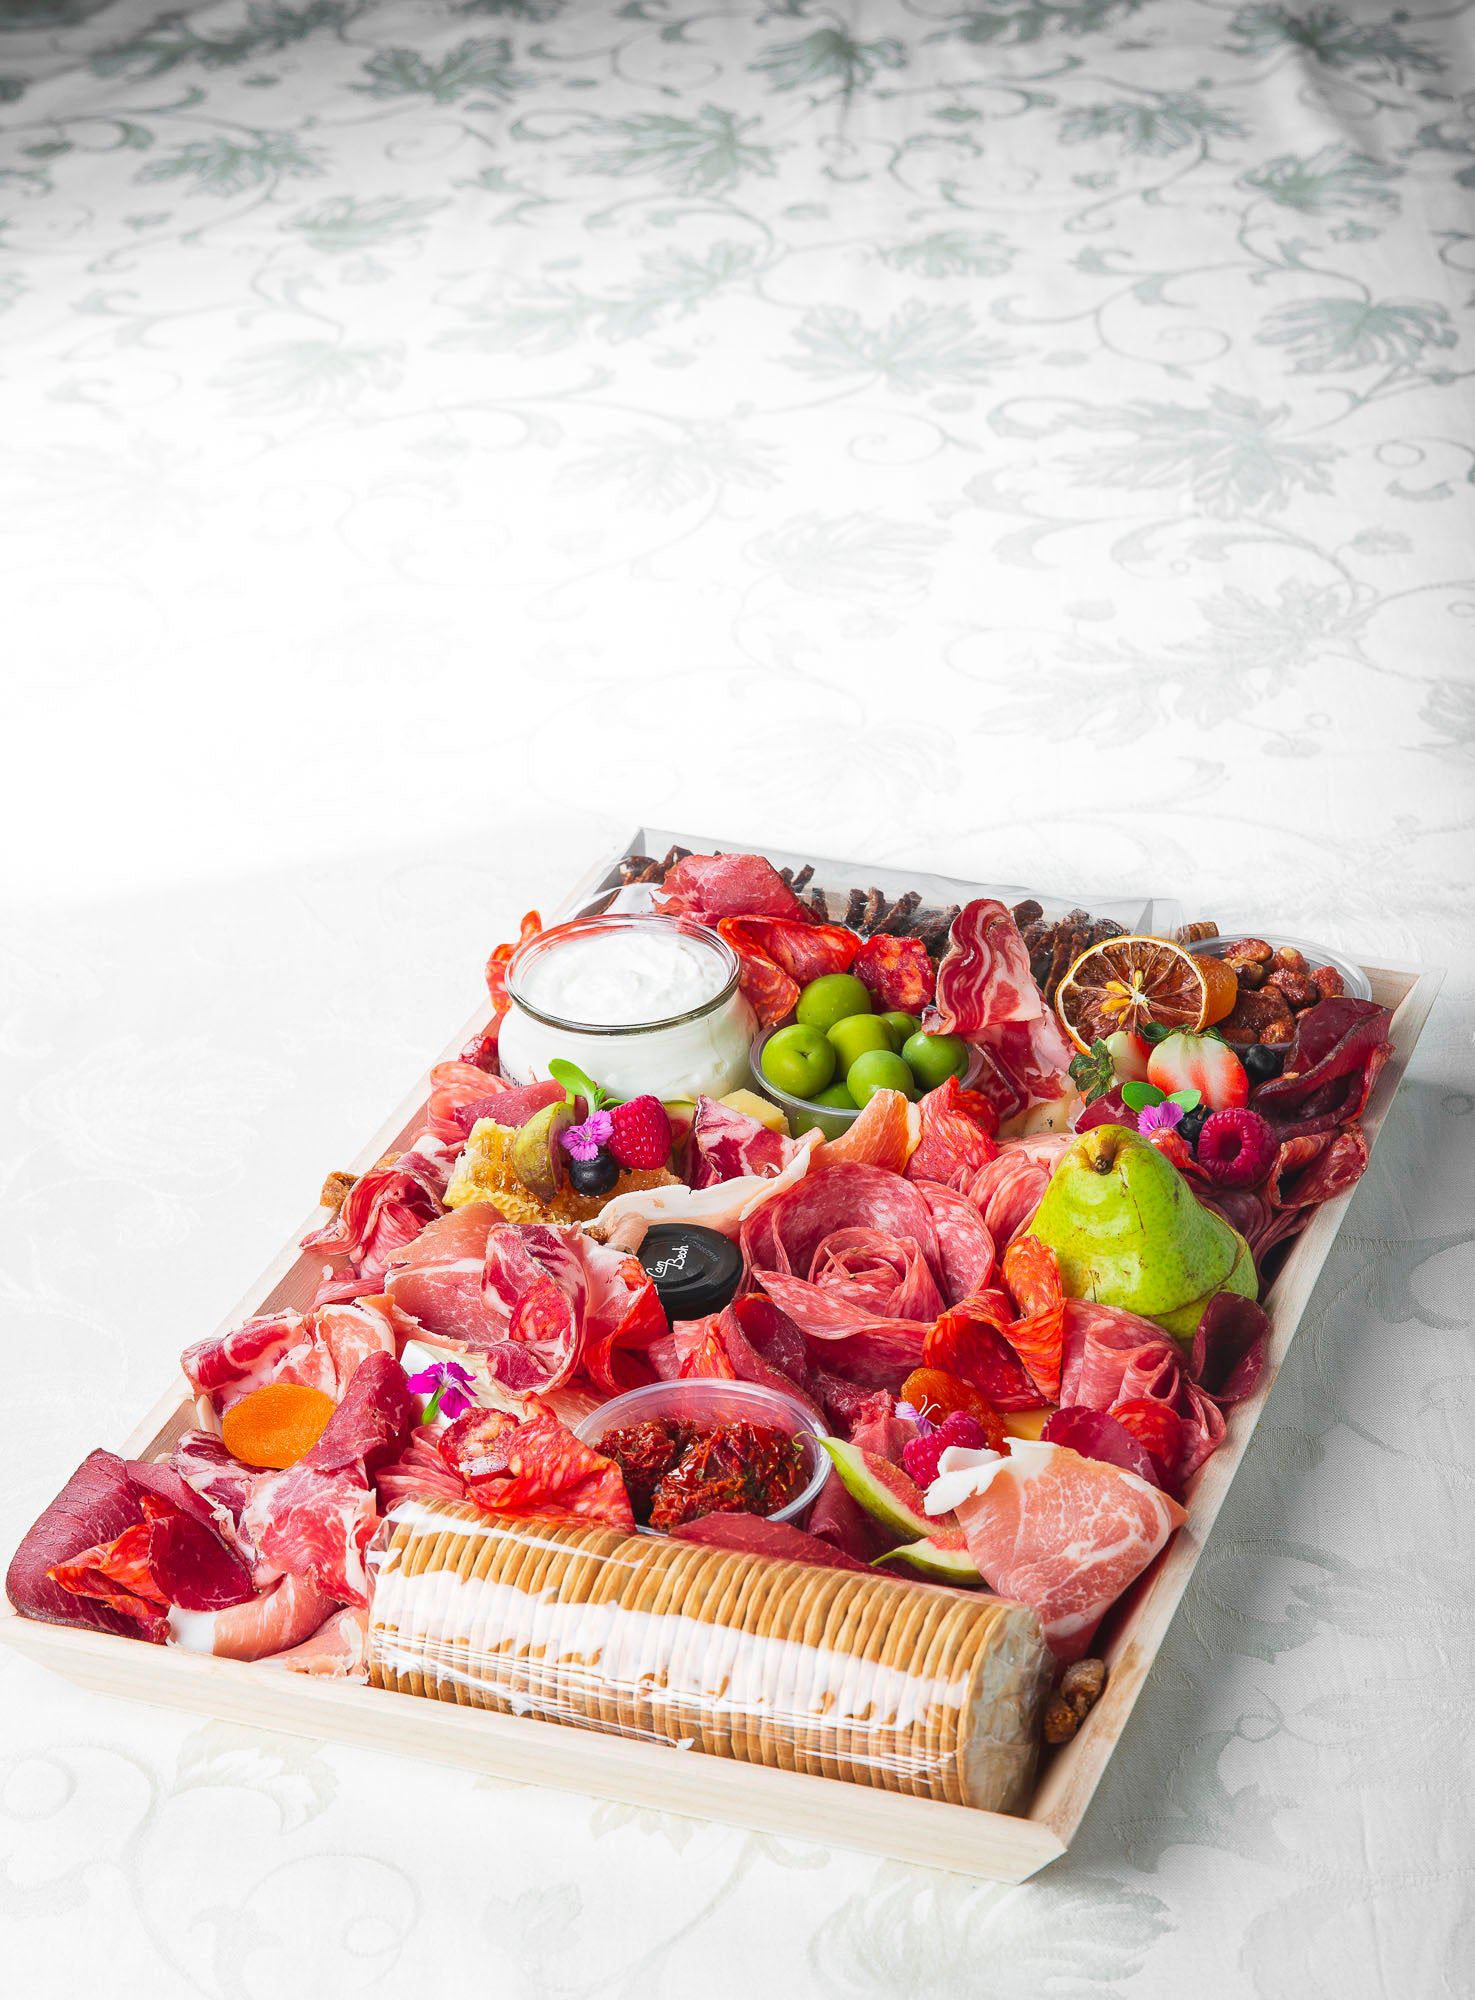 Best Small Meat Lover Charcuterie Board (Serves 10-15) Toronto Ontario The Graze Anatomy